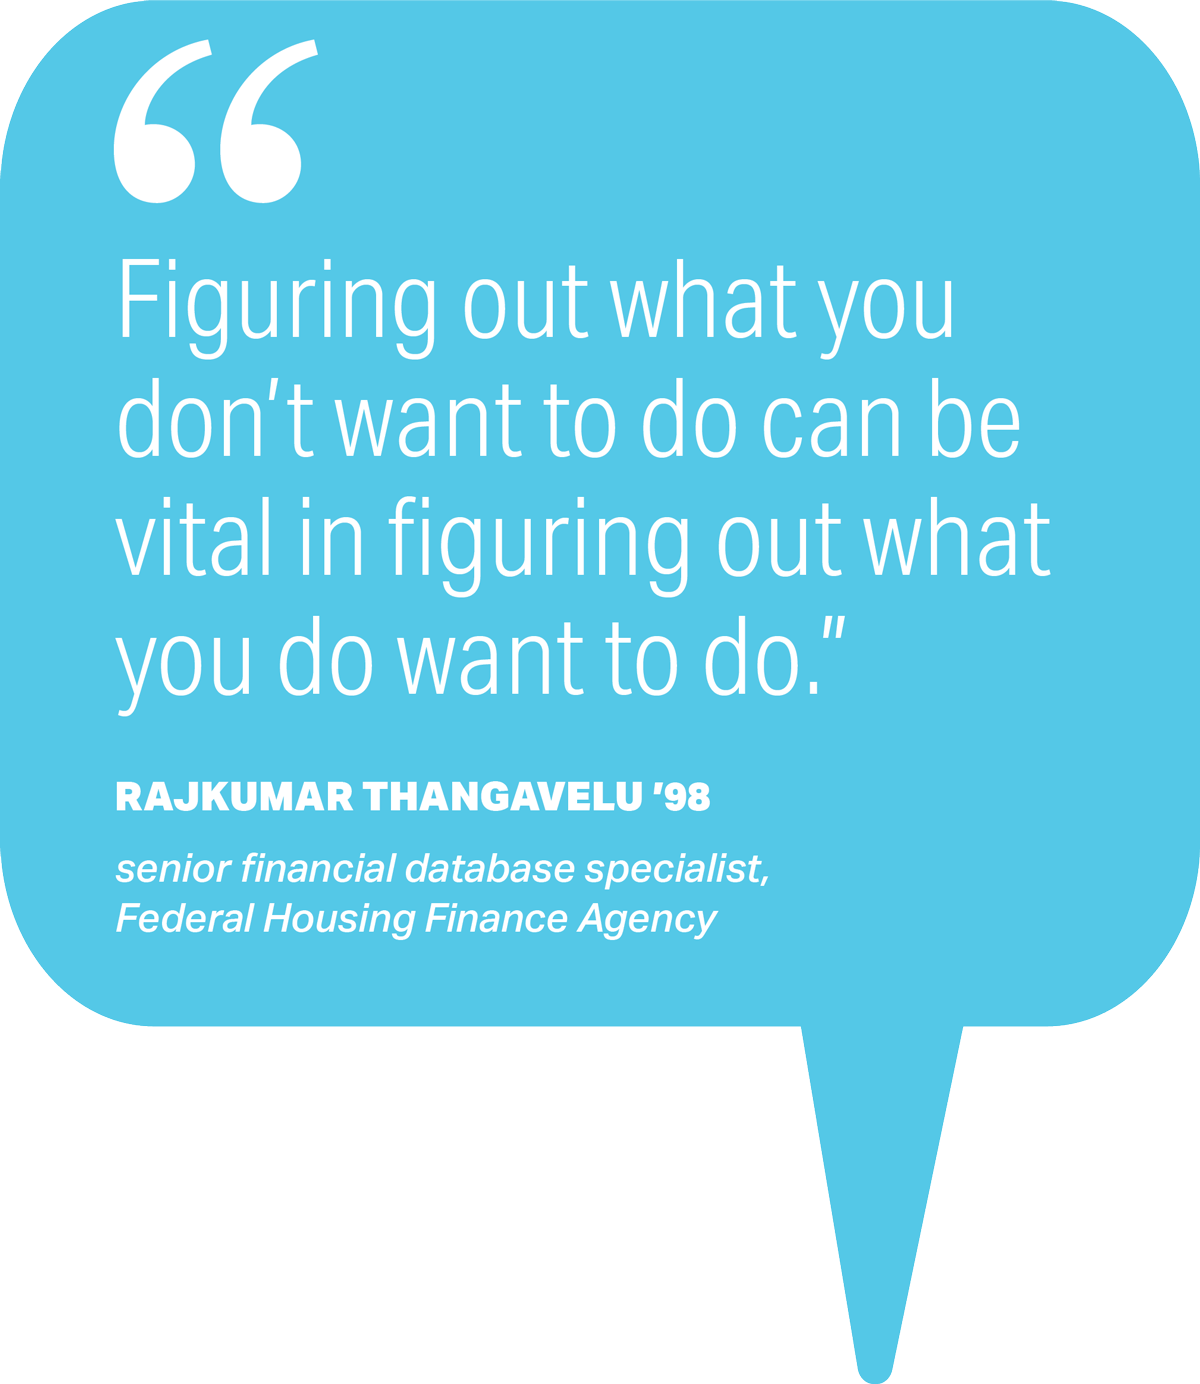 pull quote that reads Figuring out what you don't want to do can be vital in figuring out what you do want to do. - Rajkumar Thangavelu '98, senior financial database specialist, Federal Housing Finance Agency